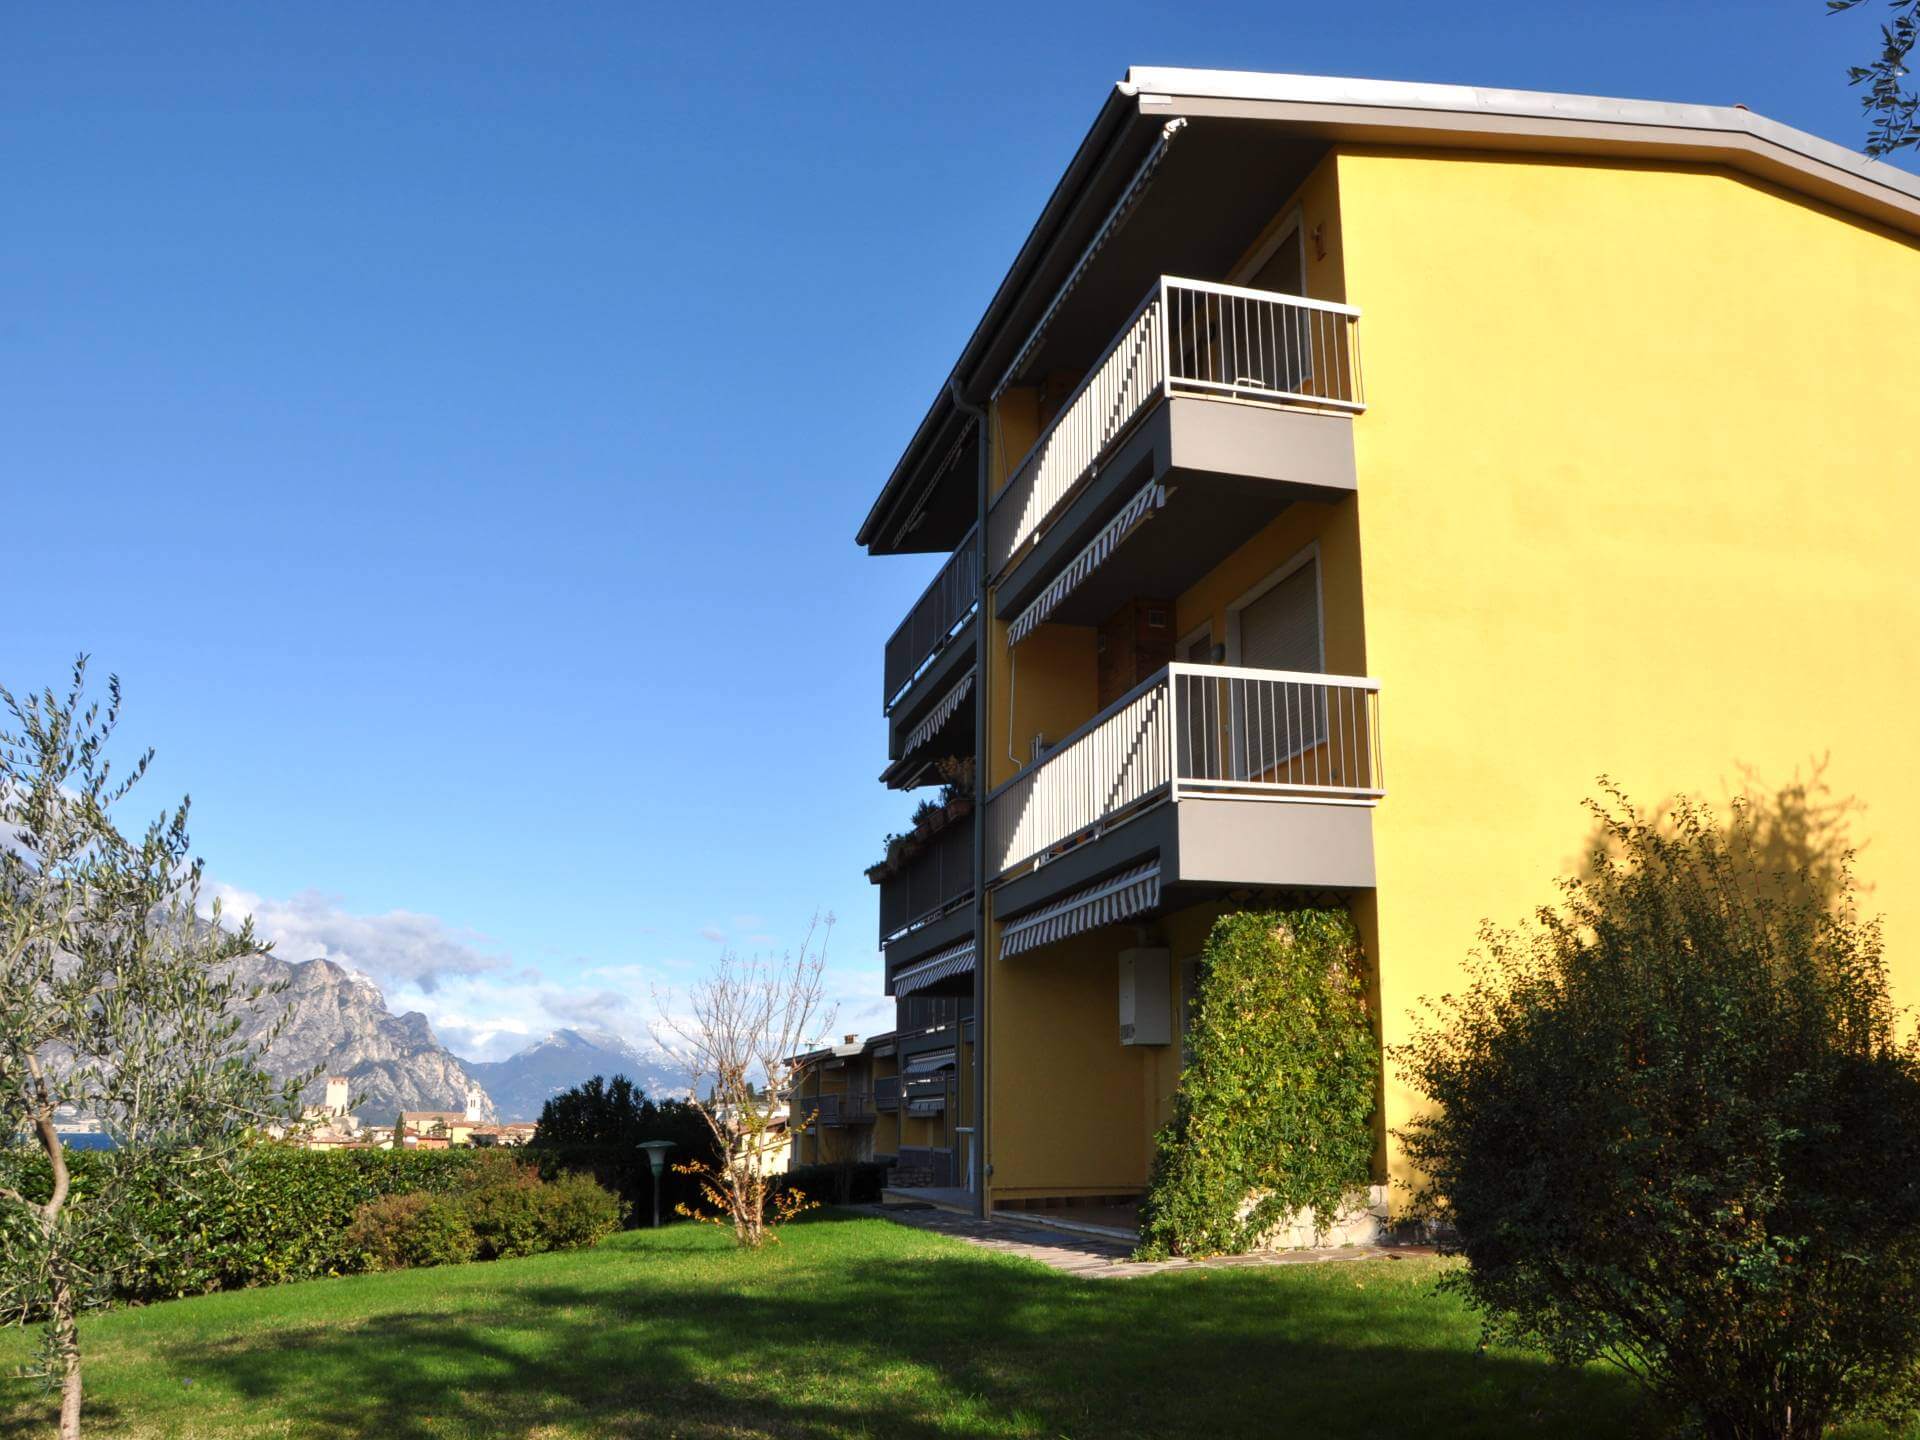 Photo of Residence 2 of Apartments Andreis in Malcesine